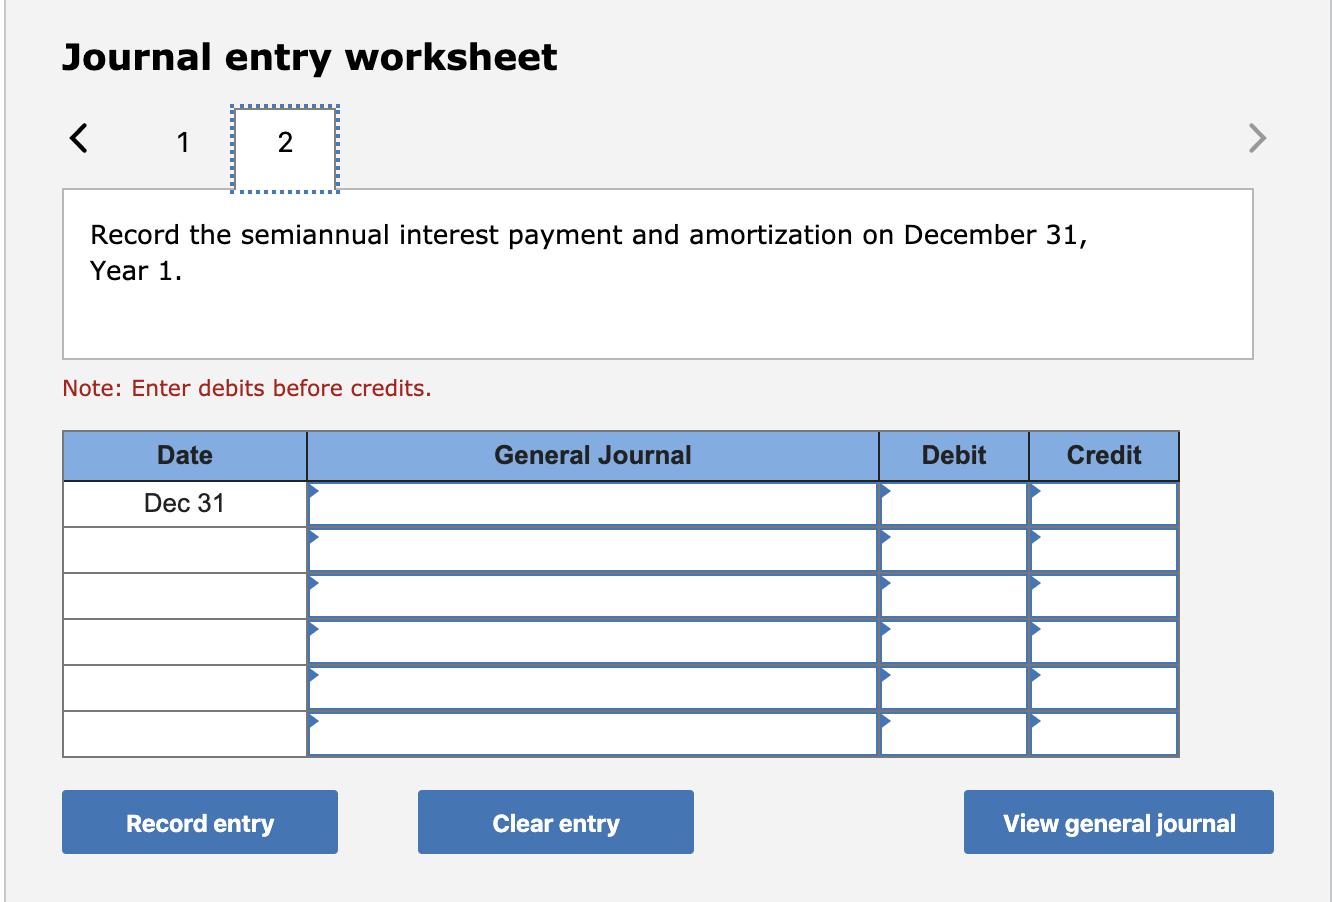 Journal entry worksheet < 1 Record the semiannual interest payment and amortization on December 31, Year 1. Note: Enter debit